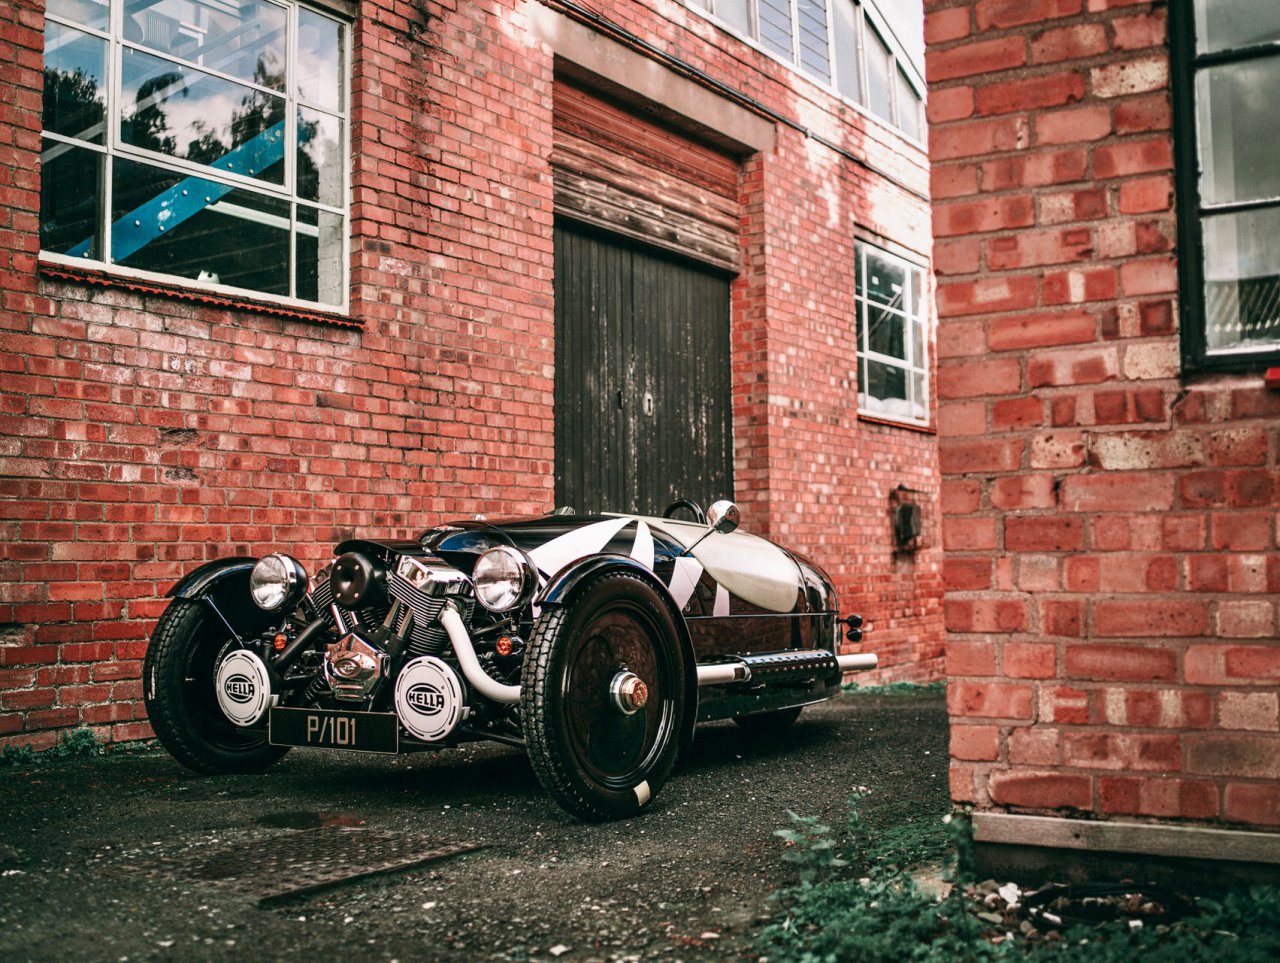 Morgan, Morgan ends 3 Wheeler production (for now) with special P101 model, ClassicCars.com Journal